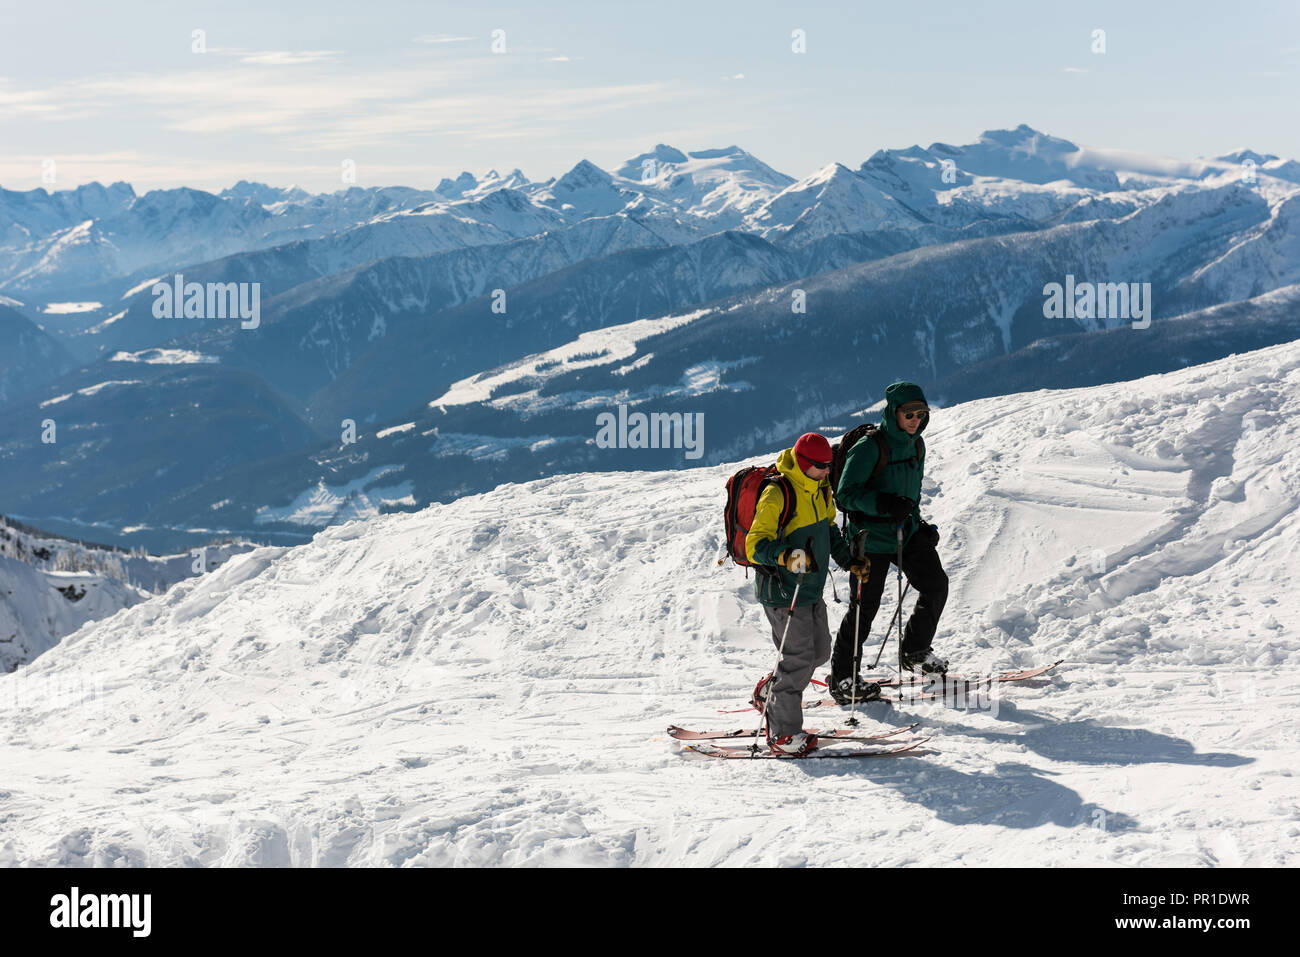 Male and female skiers walking on a snowy mountain Stock Photo